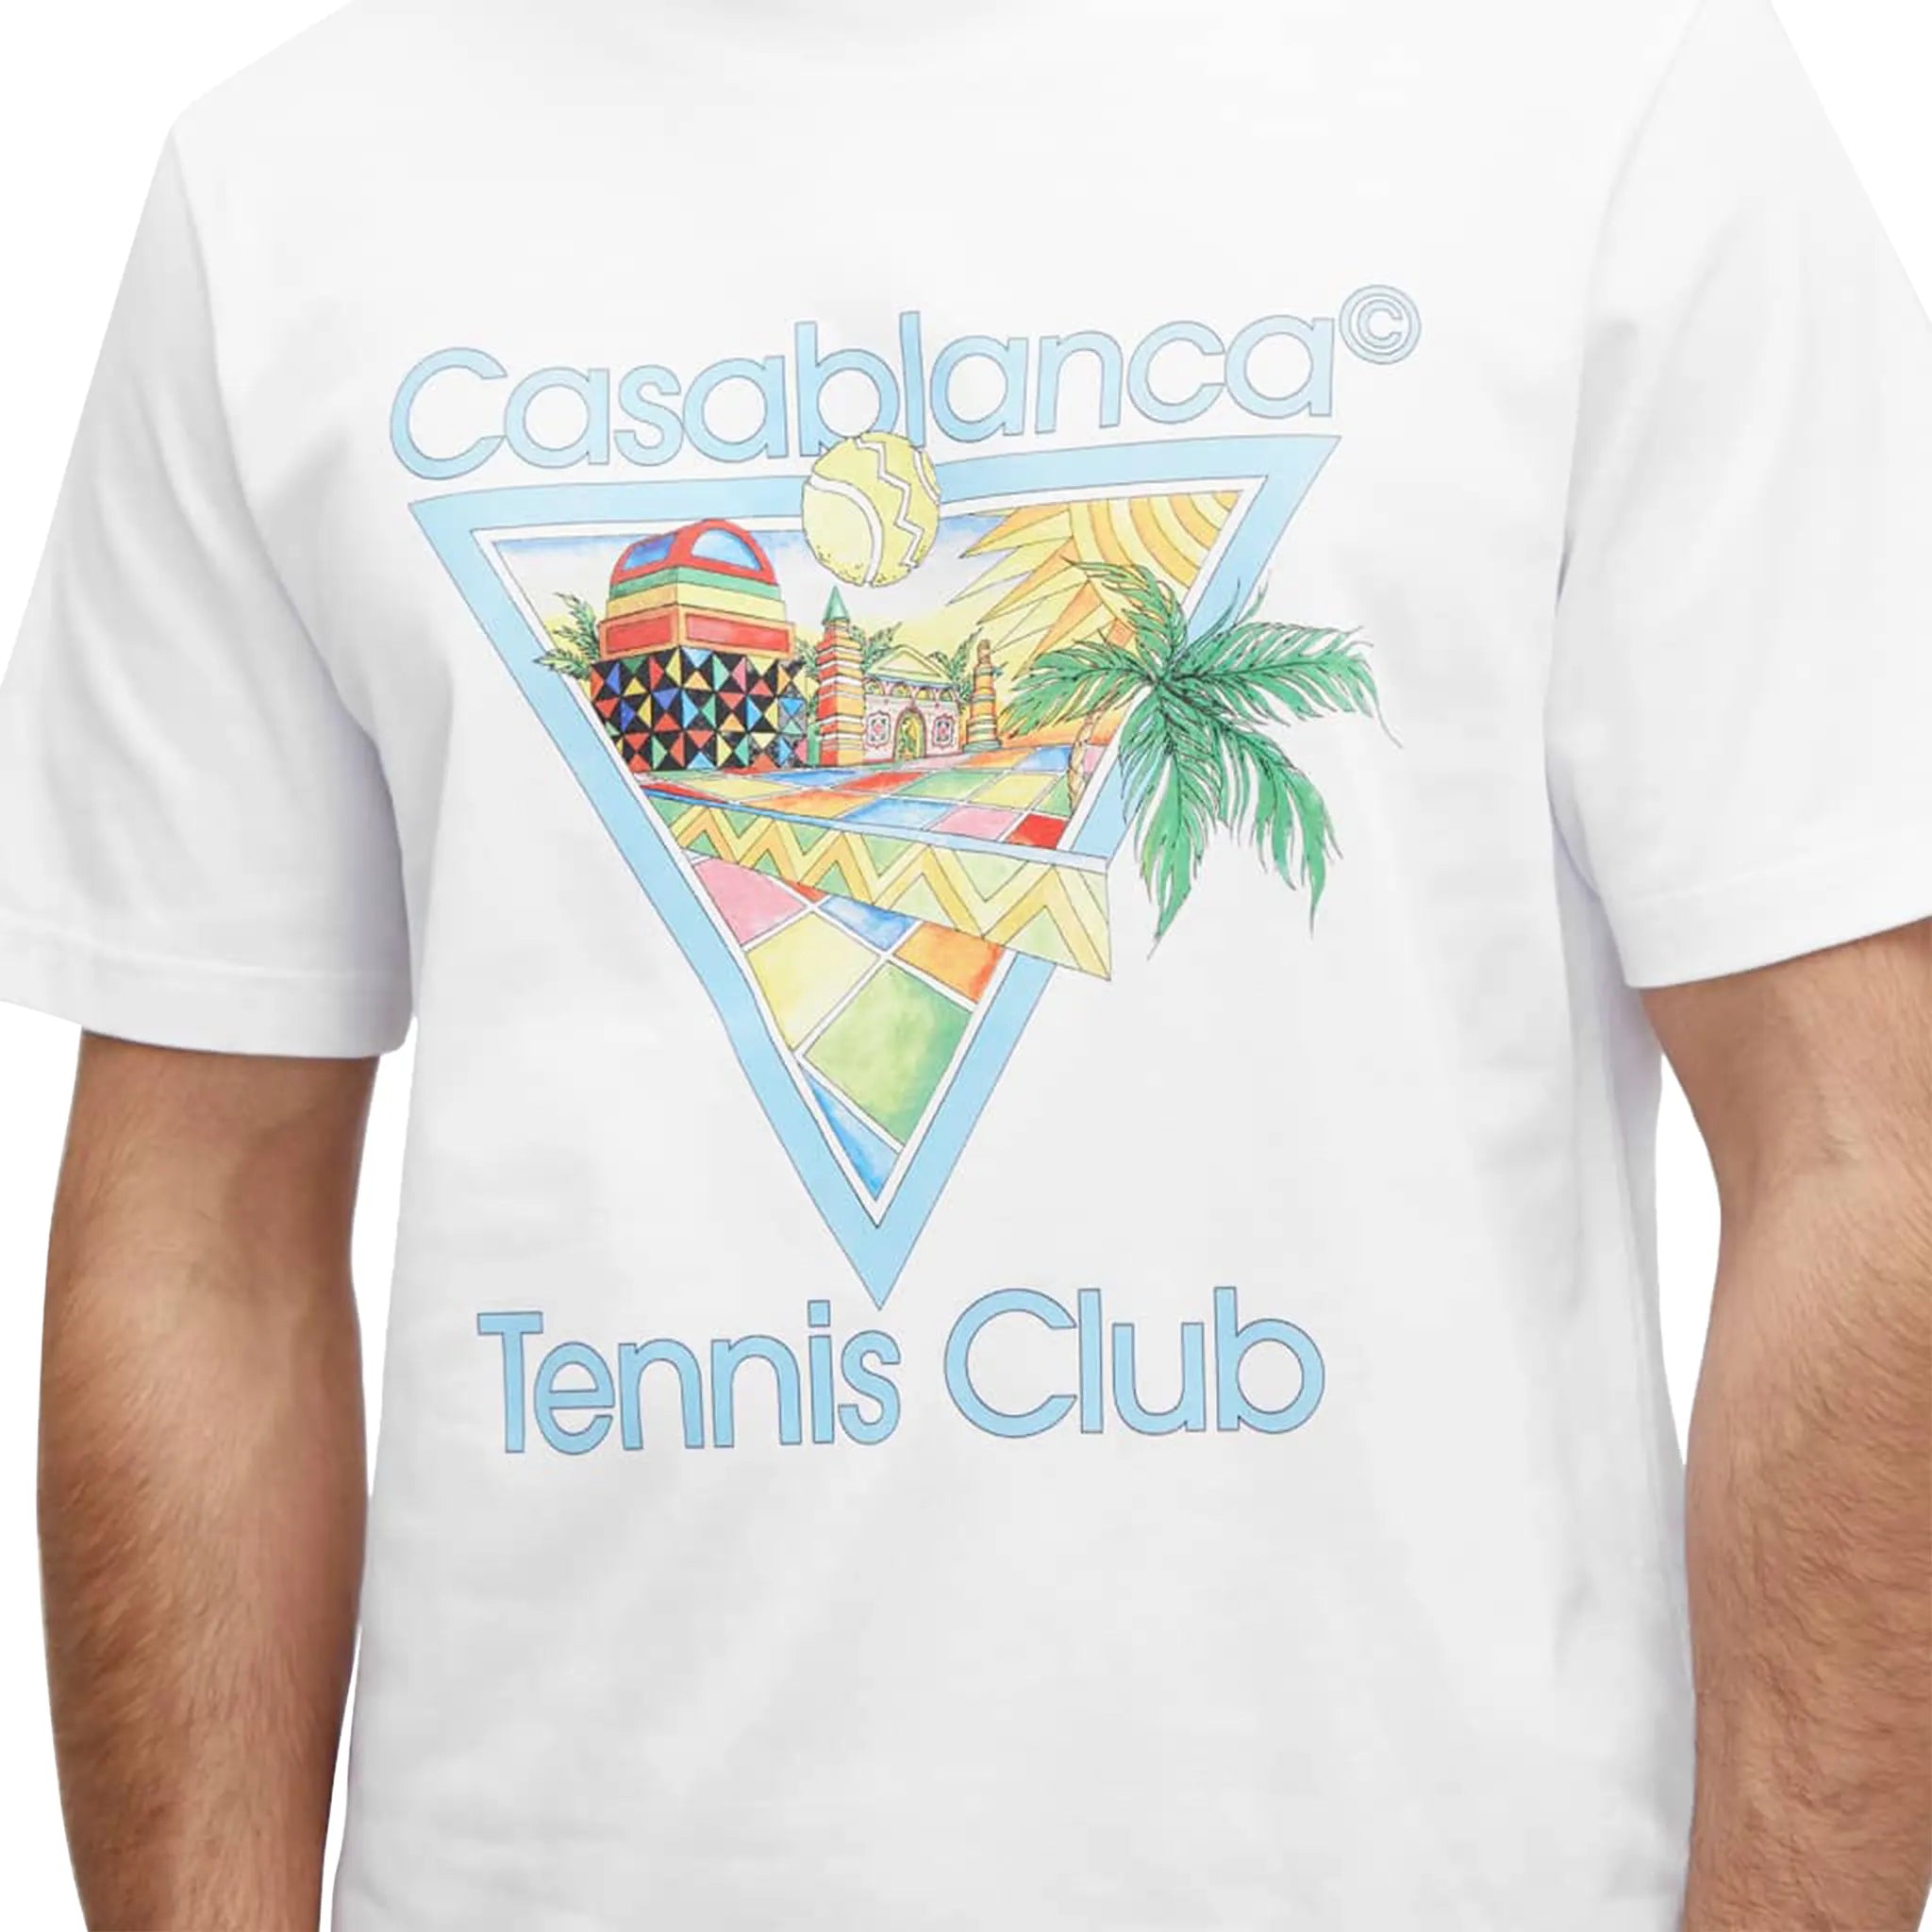 Model logo view of Casablanca Afro Cubism Tennis Club White T Shirt MS24-JTS-001-05